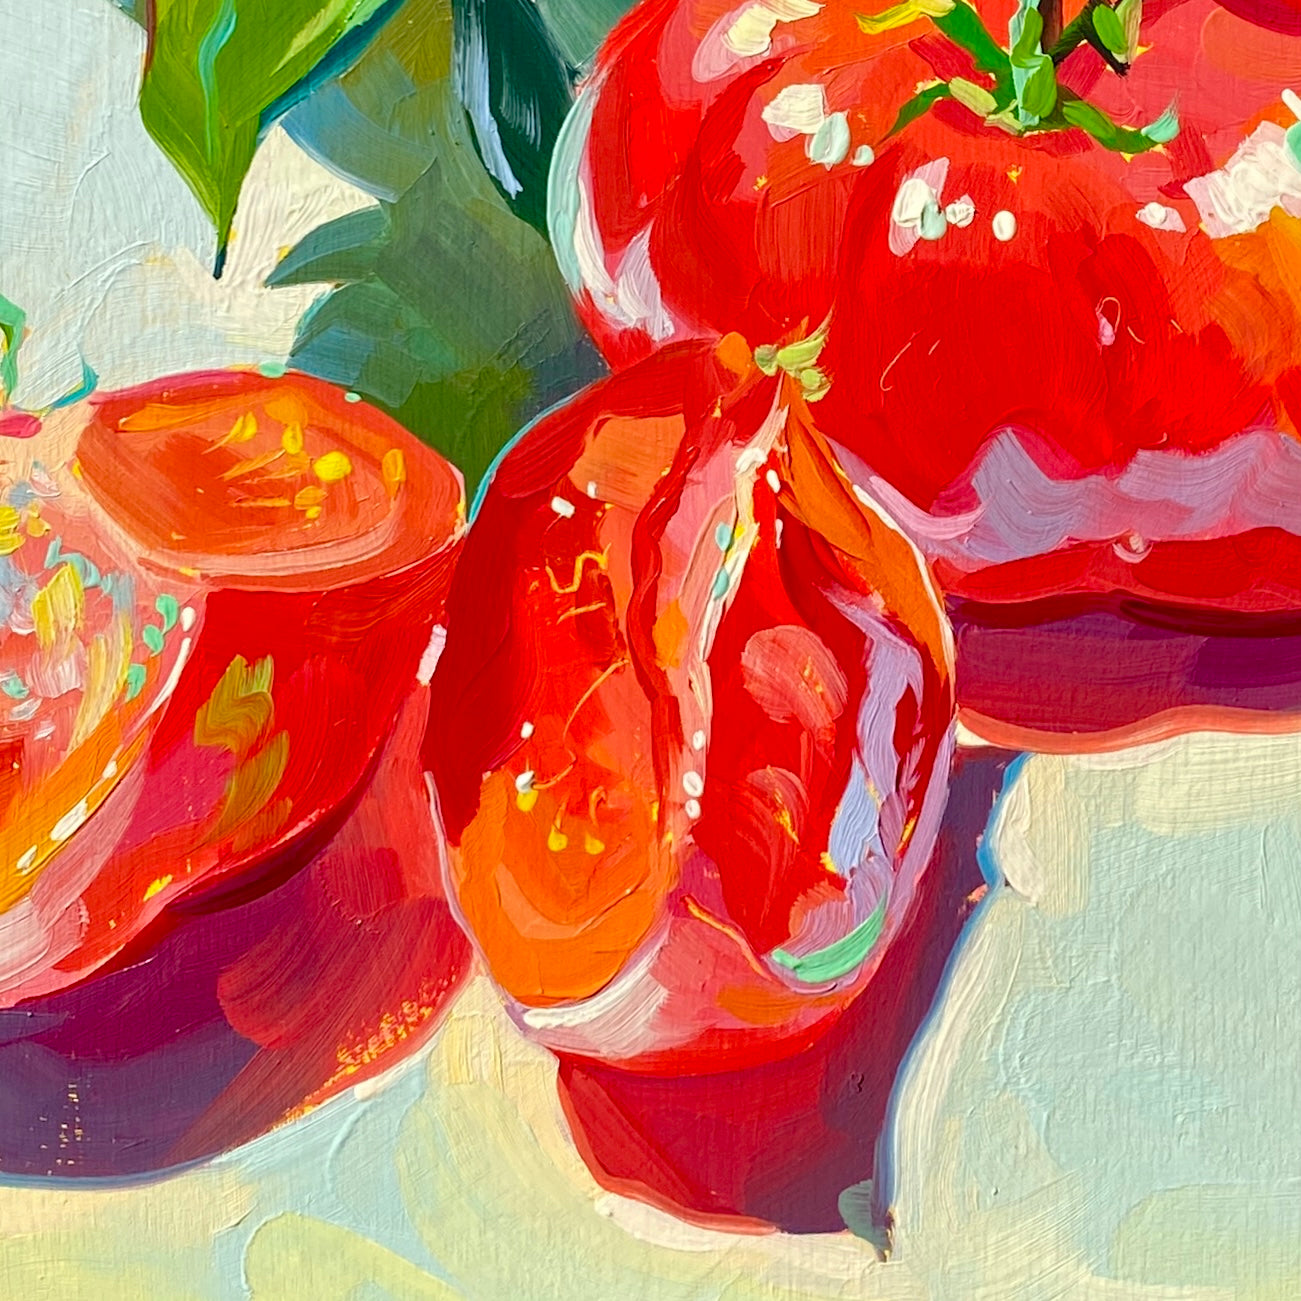 Red and green - Original Oil Painting